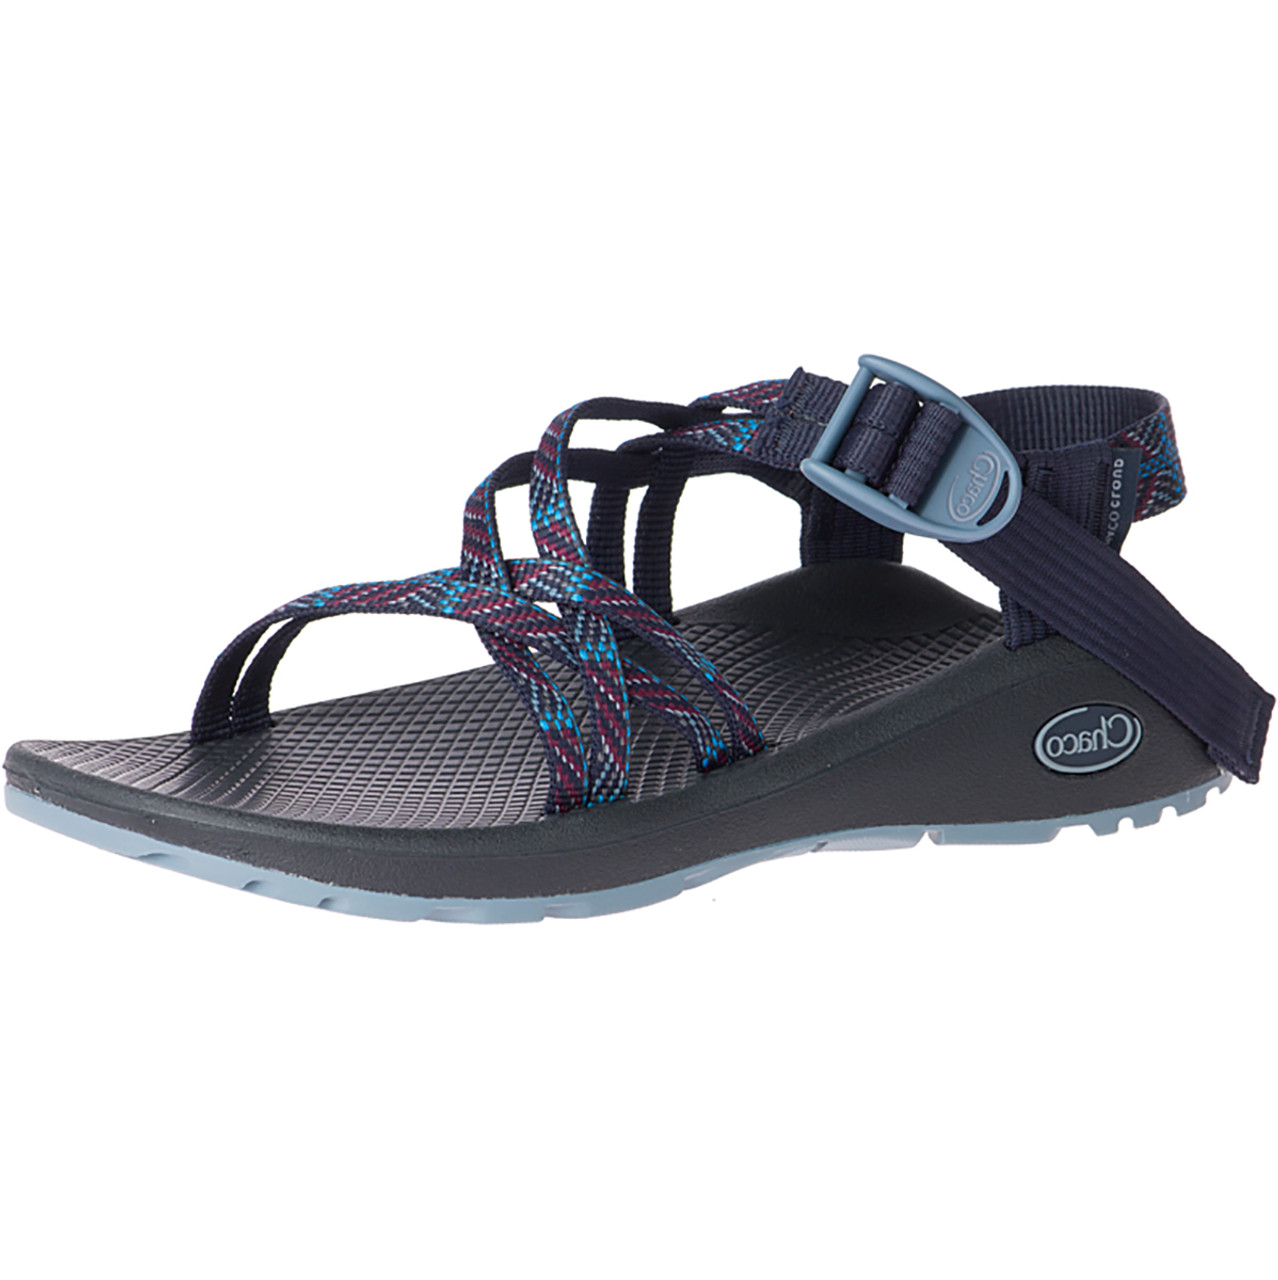 sandals comparable to chacos